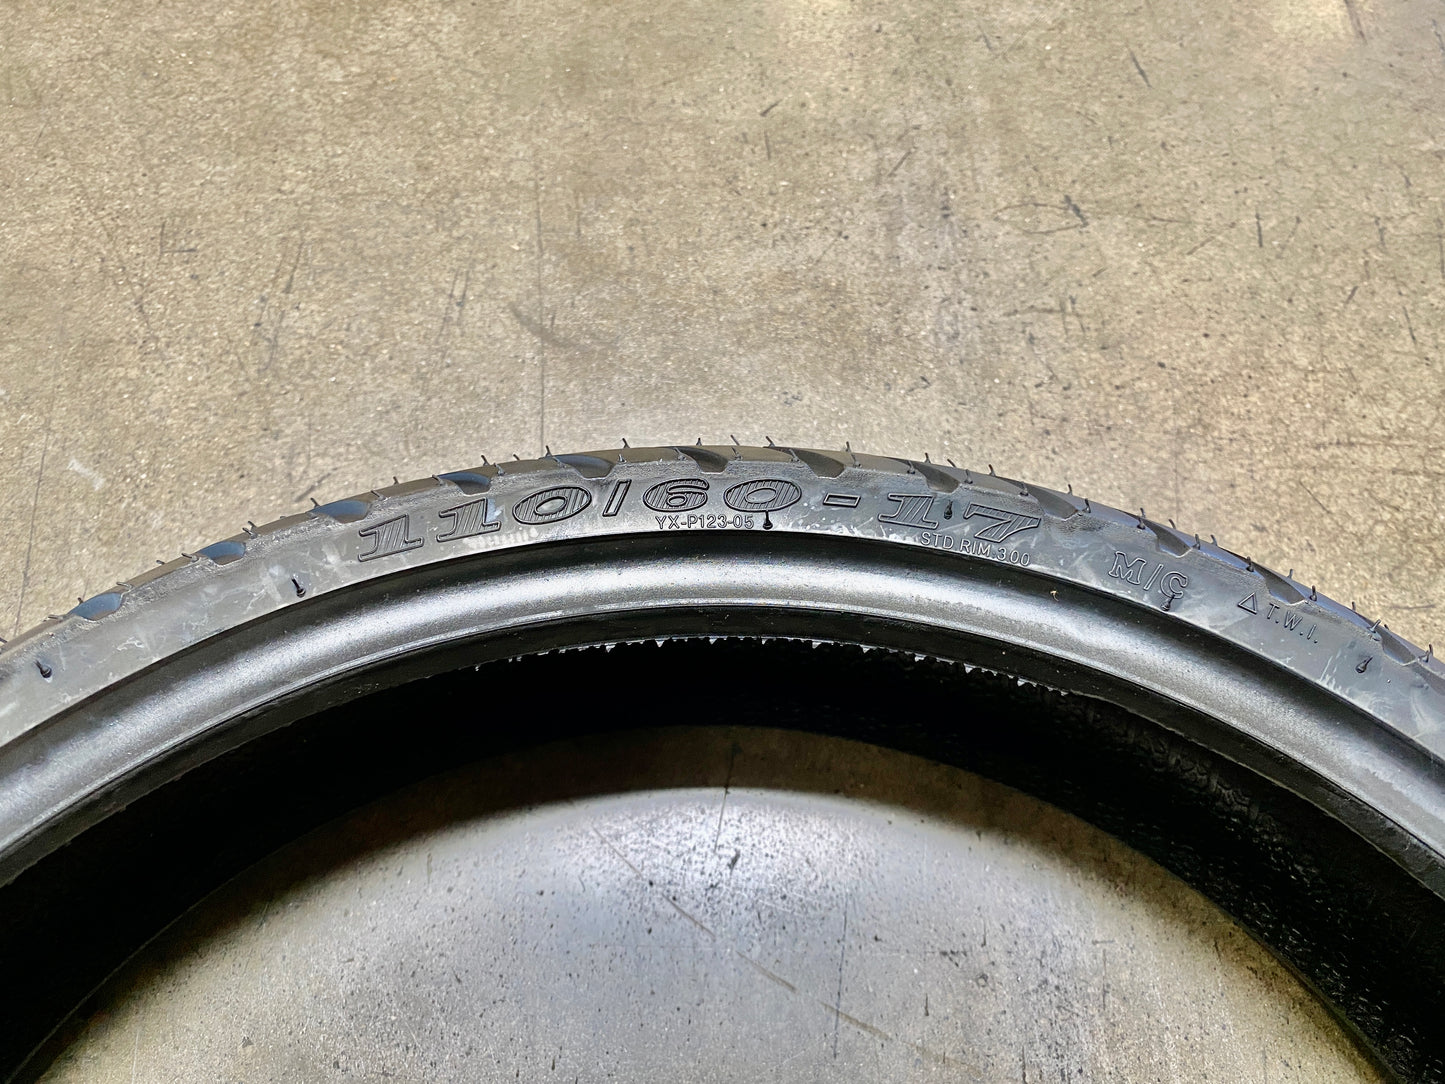 X22R tire for sale 110x60-17